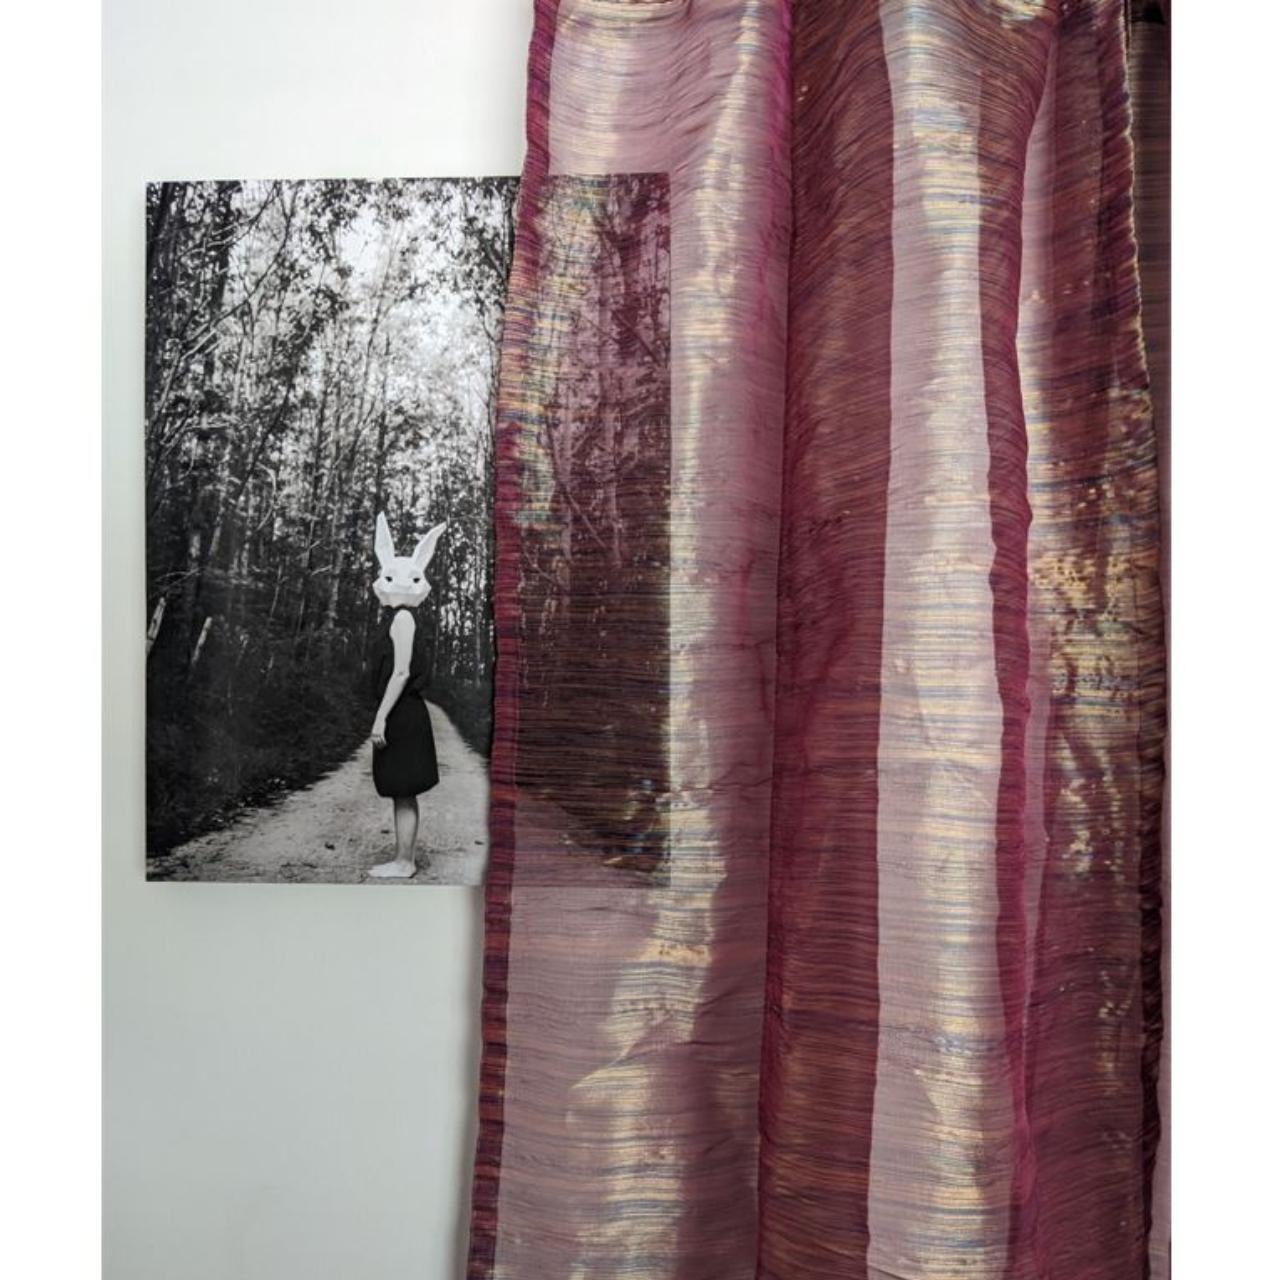 Product Image 1 - Bright striped curtain sheers

2 Panels.